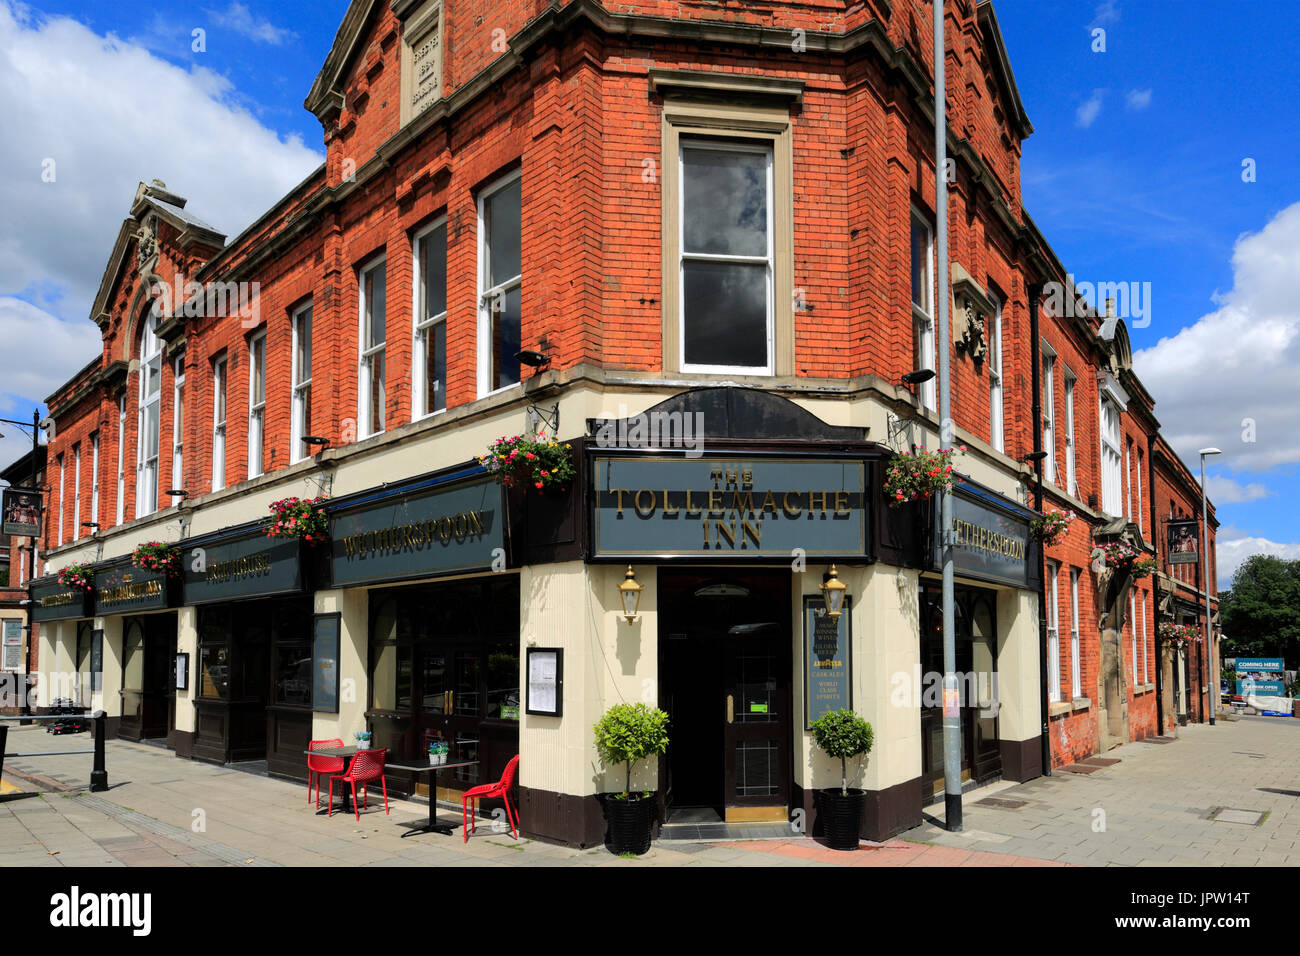 Die Tollemache Inn Pub, St Peters Hill, Grantham Town, Lincolnshire, England, UK Stockfoto